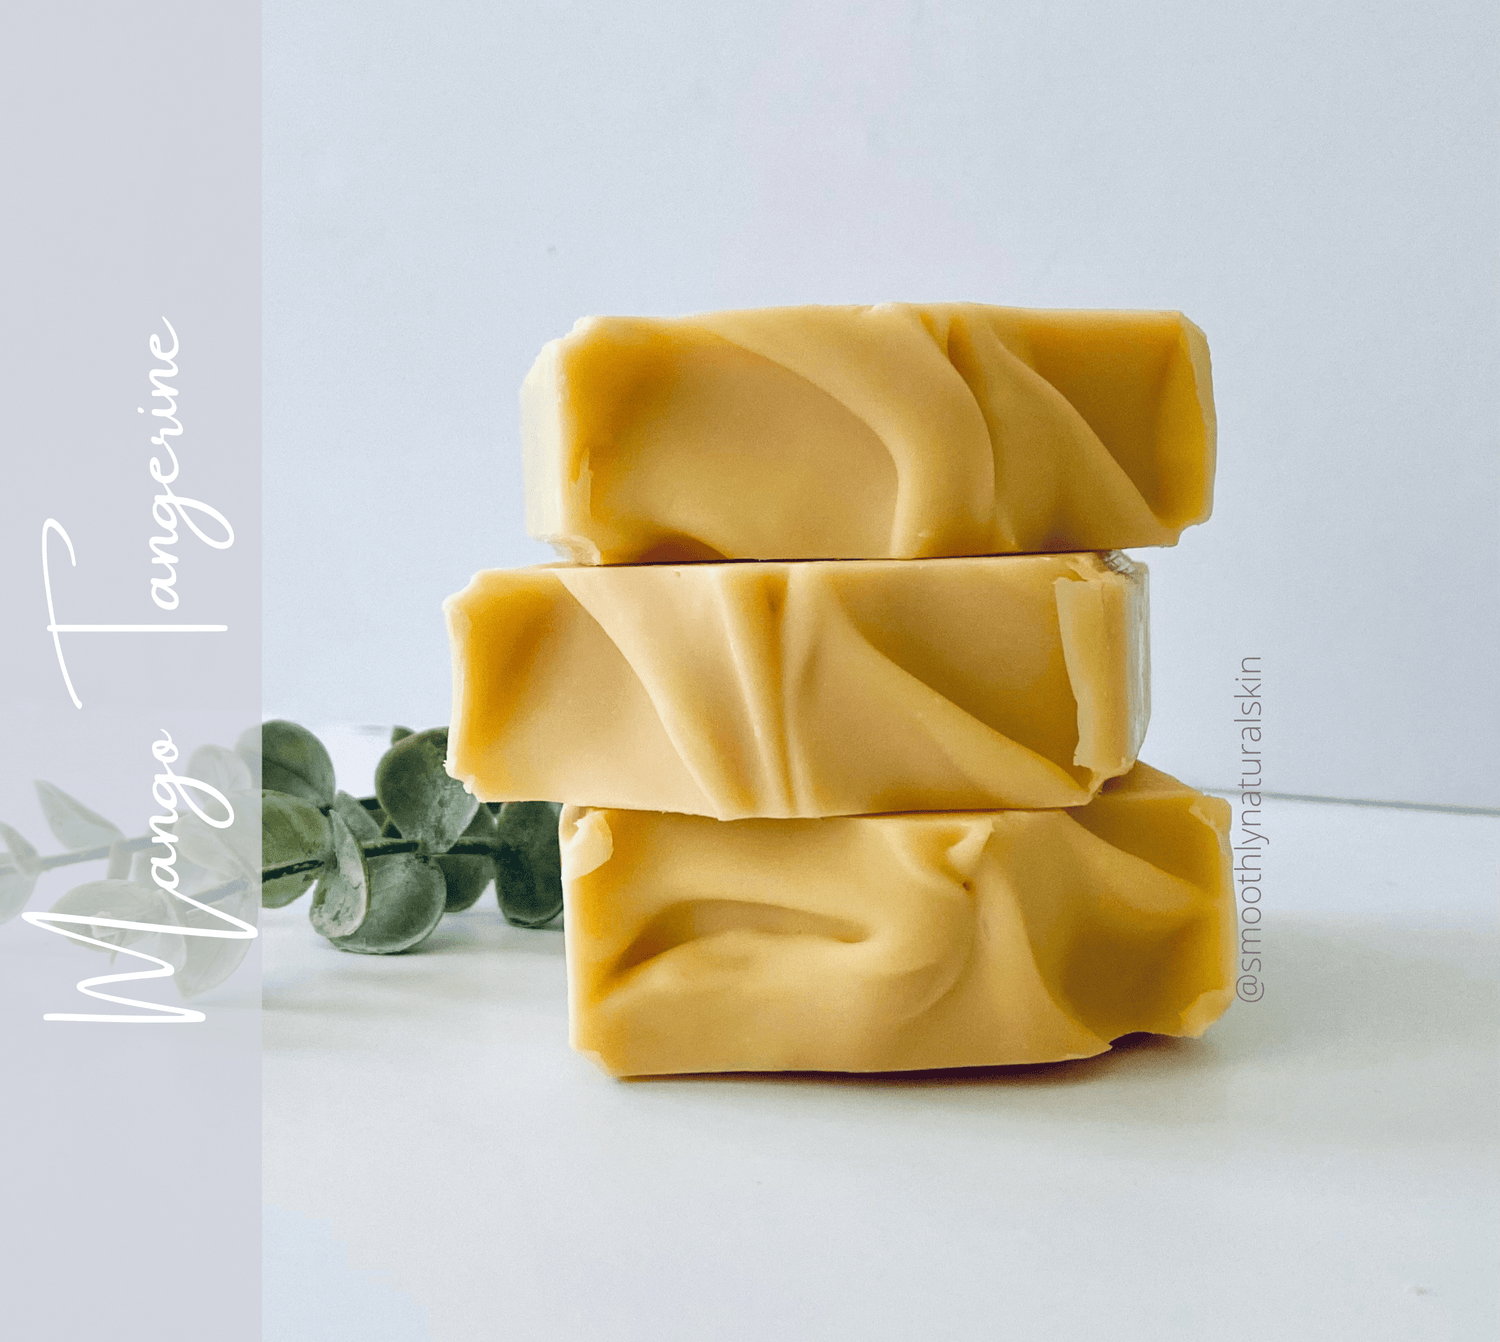 This Mango tangerine soap has a tropical blend of mango mixed with zesty clementines and red raspberries blended with sweet vanilla. Just a perfect blend; it smells so good!